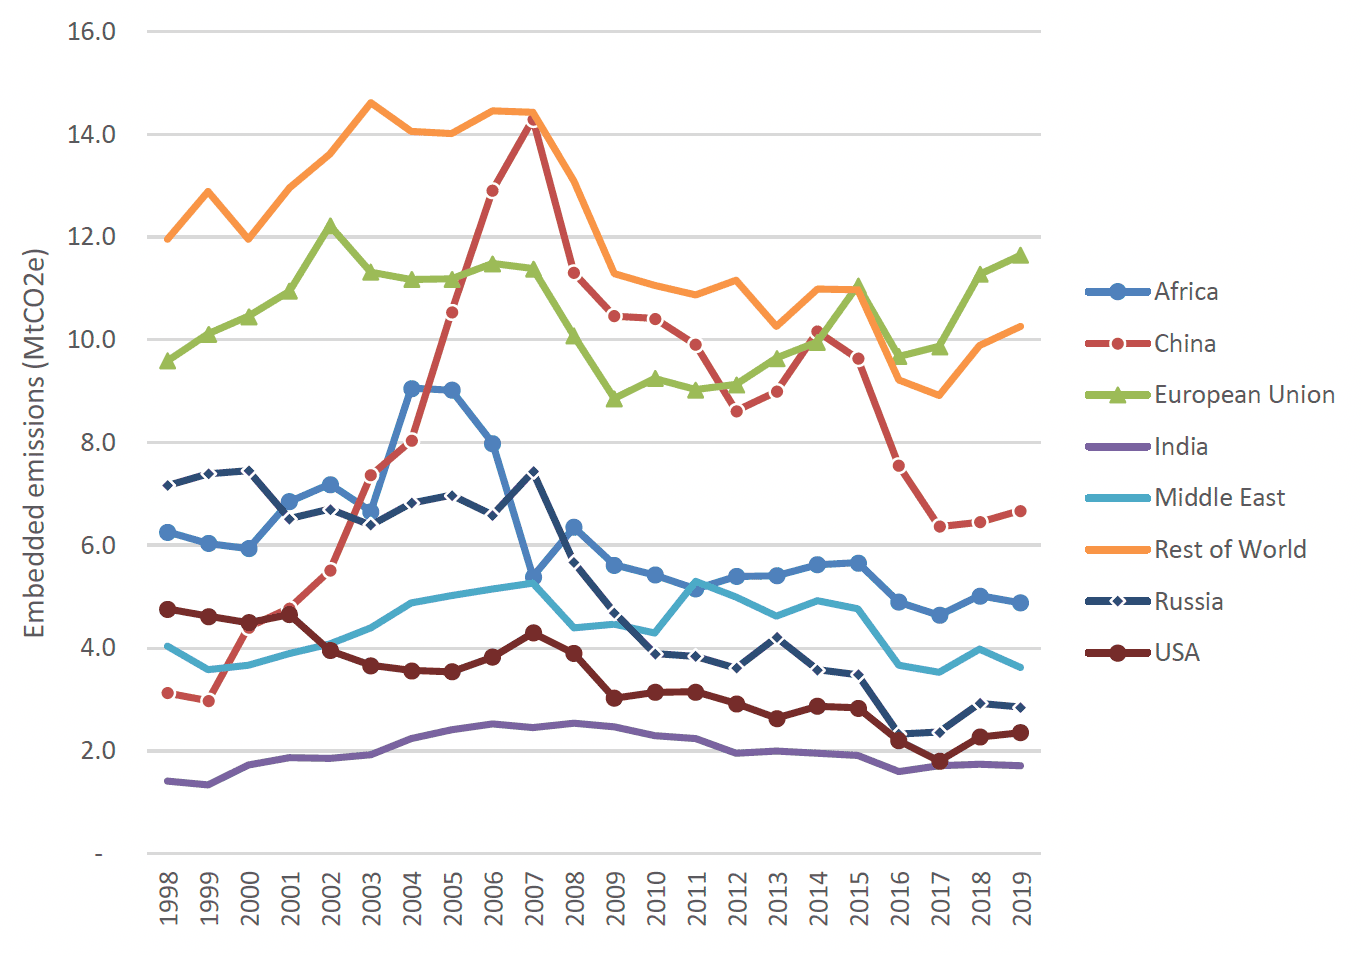 Line chart over time with separate series for: Africa, China, European Union, India, Middle East, Rest of World, Russia, USA.